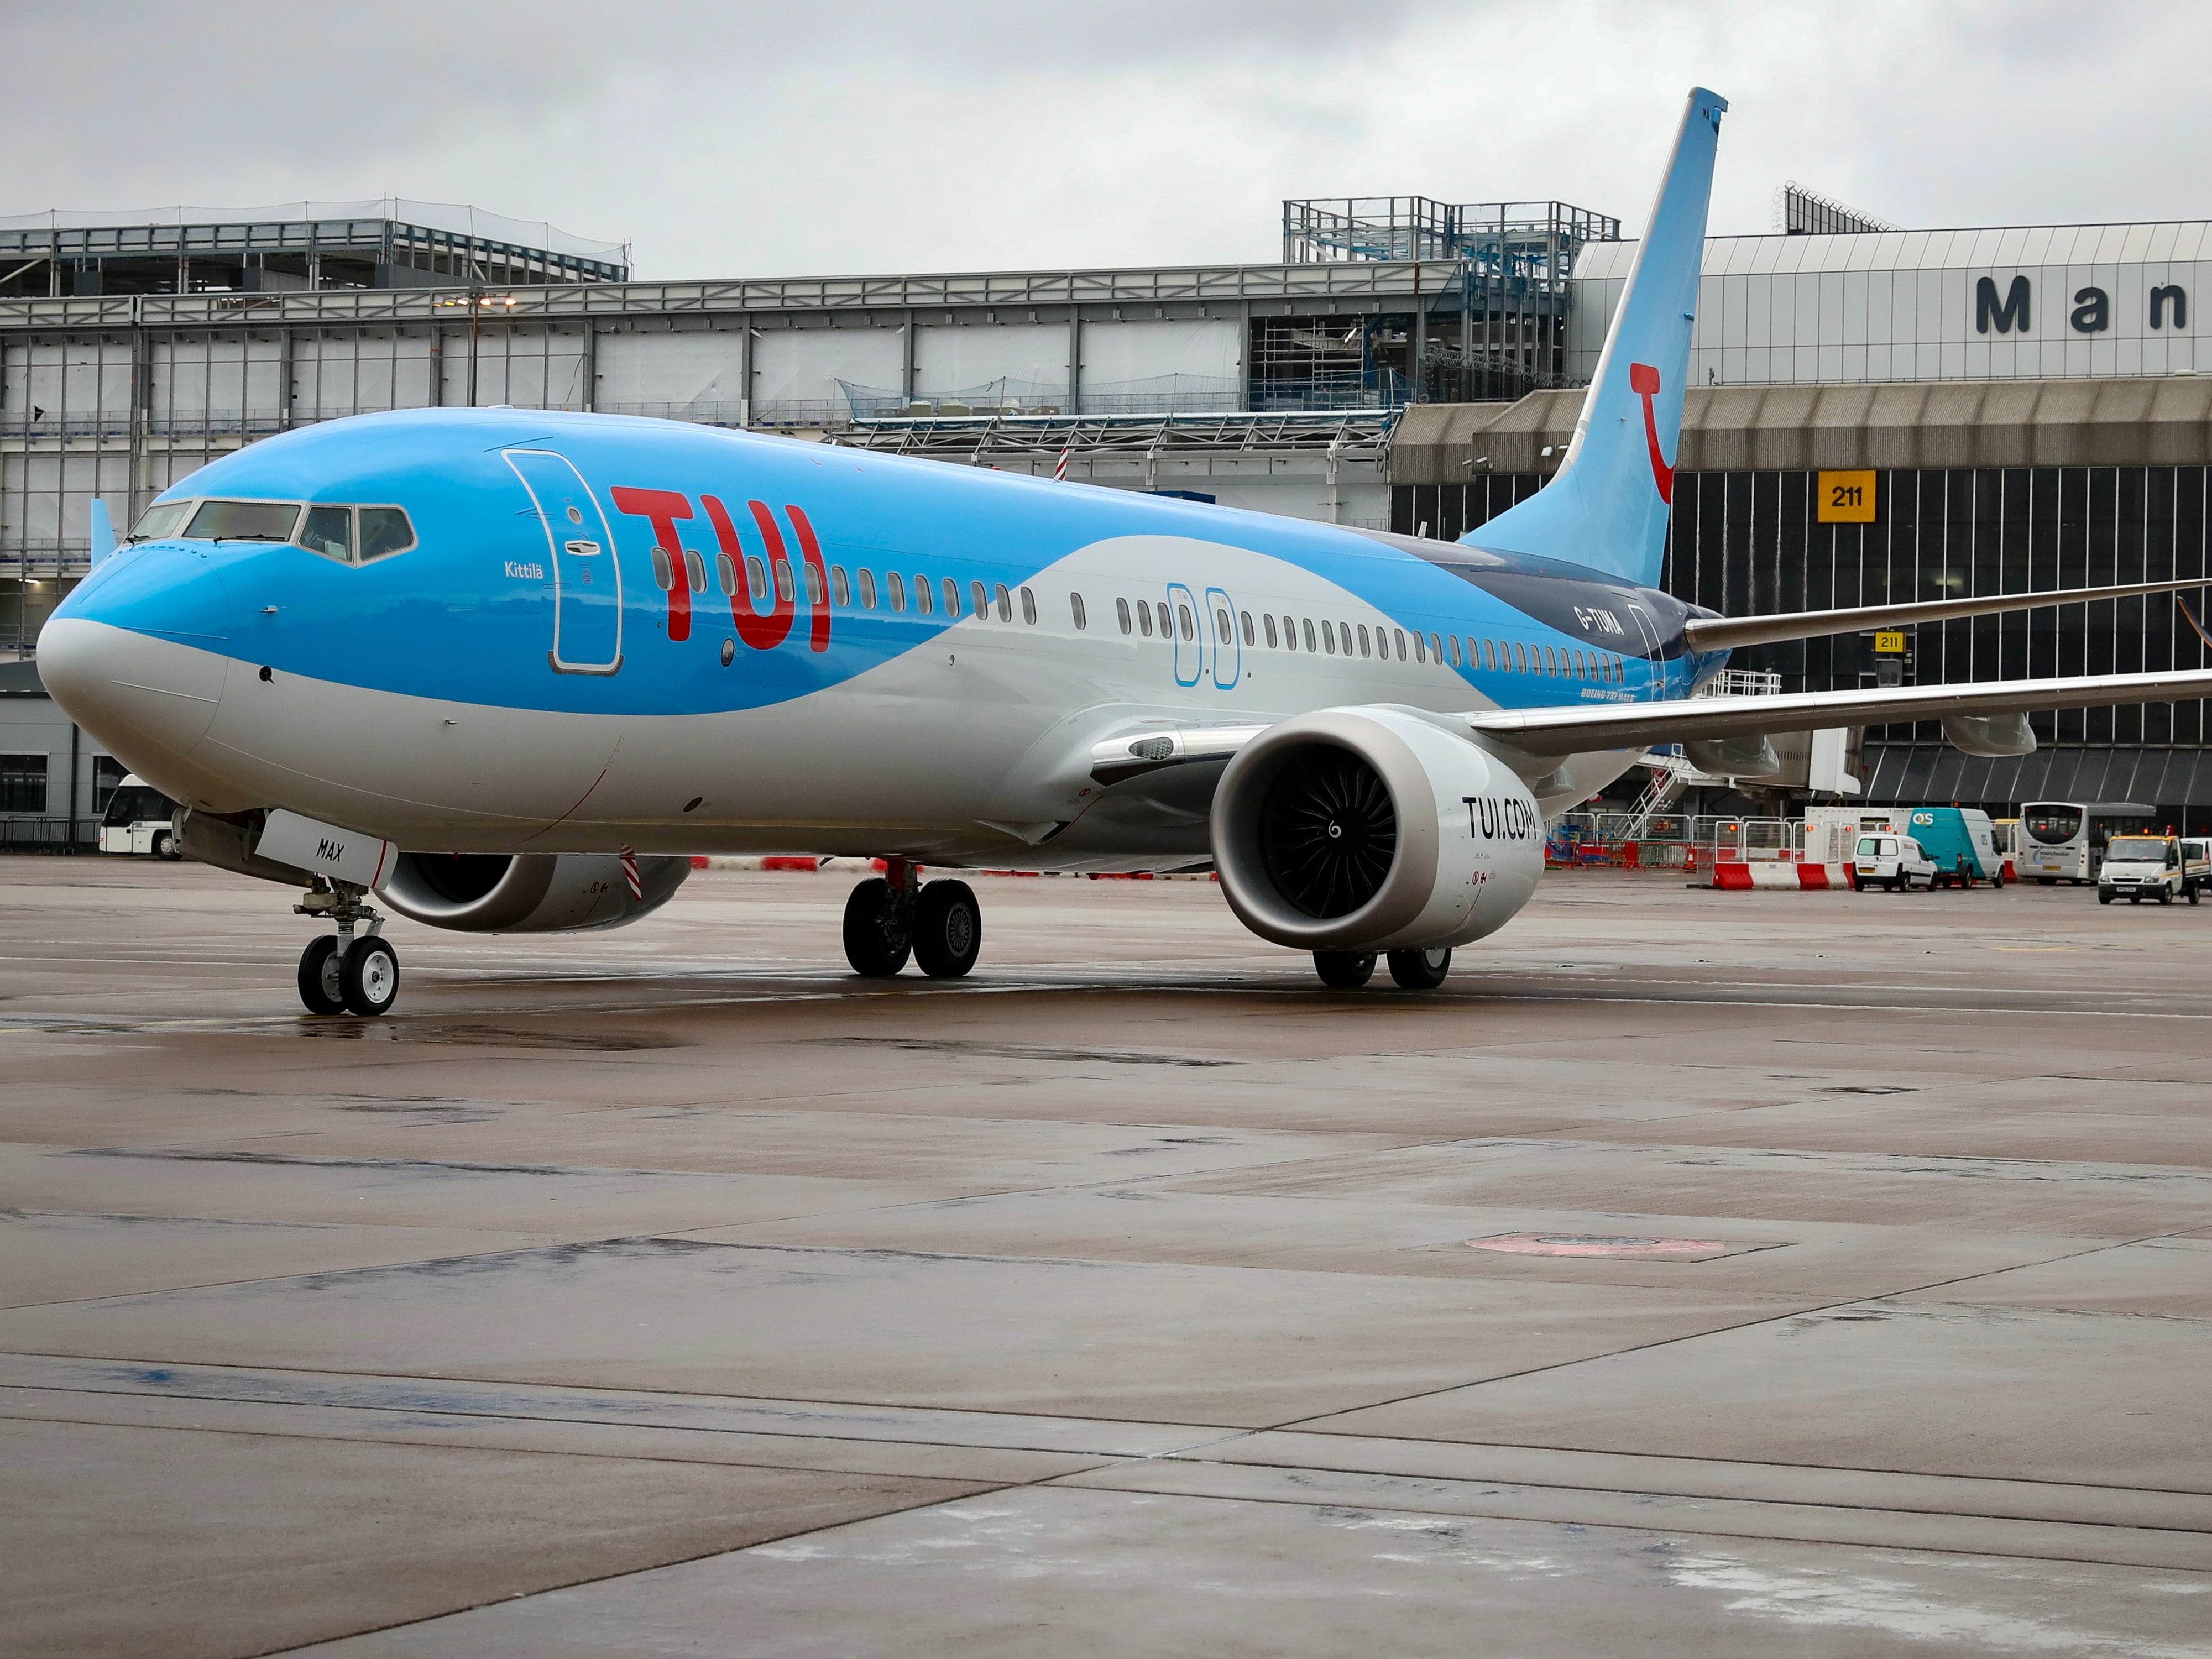 Tui Holiday prices soar by a quarter says Europe’s biggest travel firm